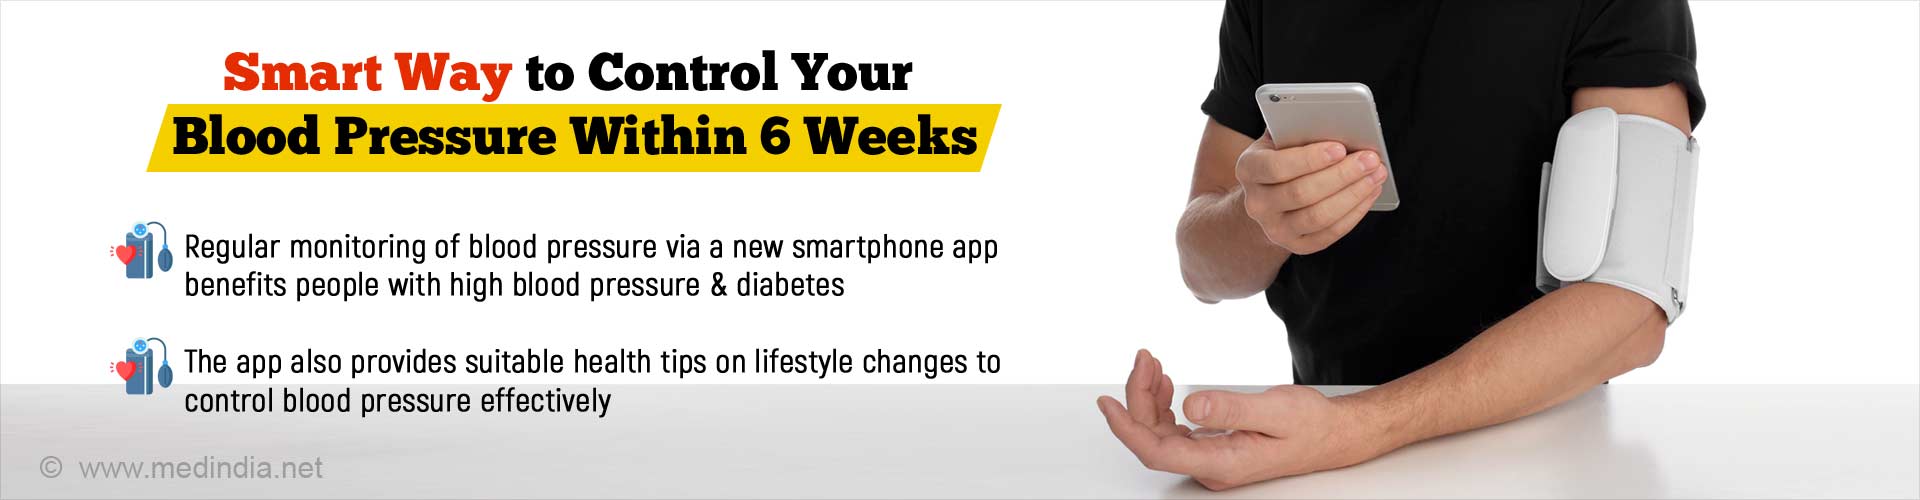 Smart way to control your blood pressure within 6 weeks. Regular monitoring of blood pressure via a new smartphone app benefits people with high blood pressure and diabetes. The app also provides suitable health tips on lifestyle changes to control blood pressure effectively.